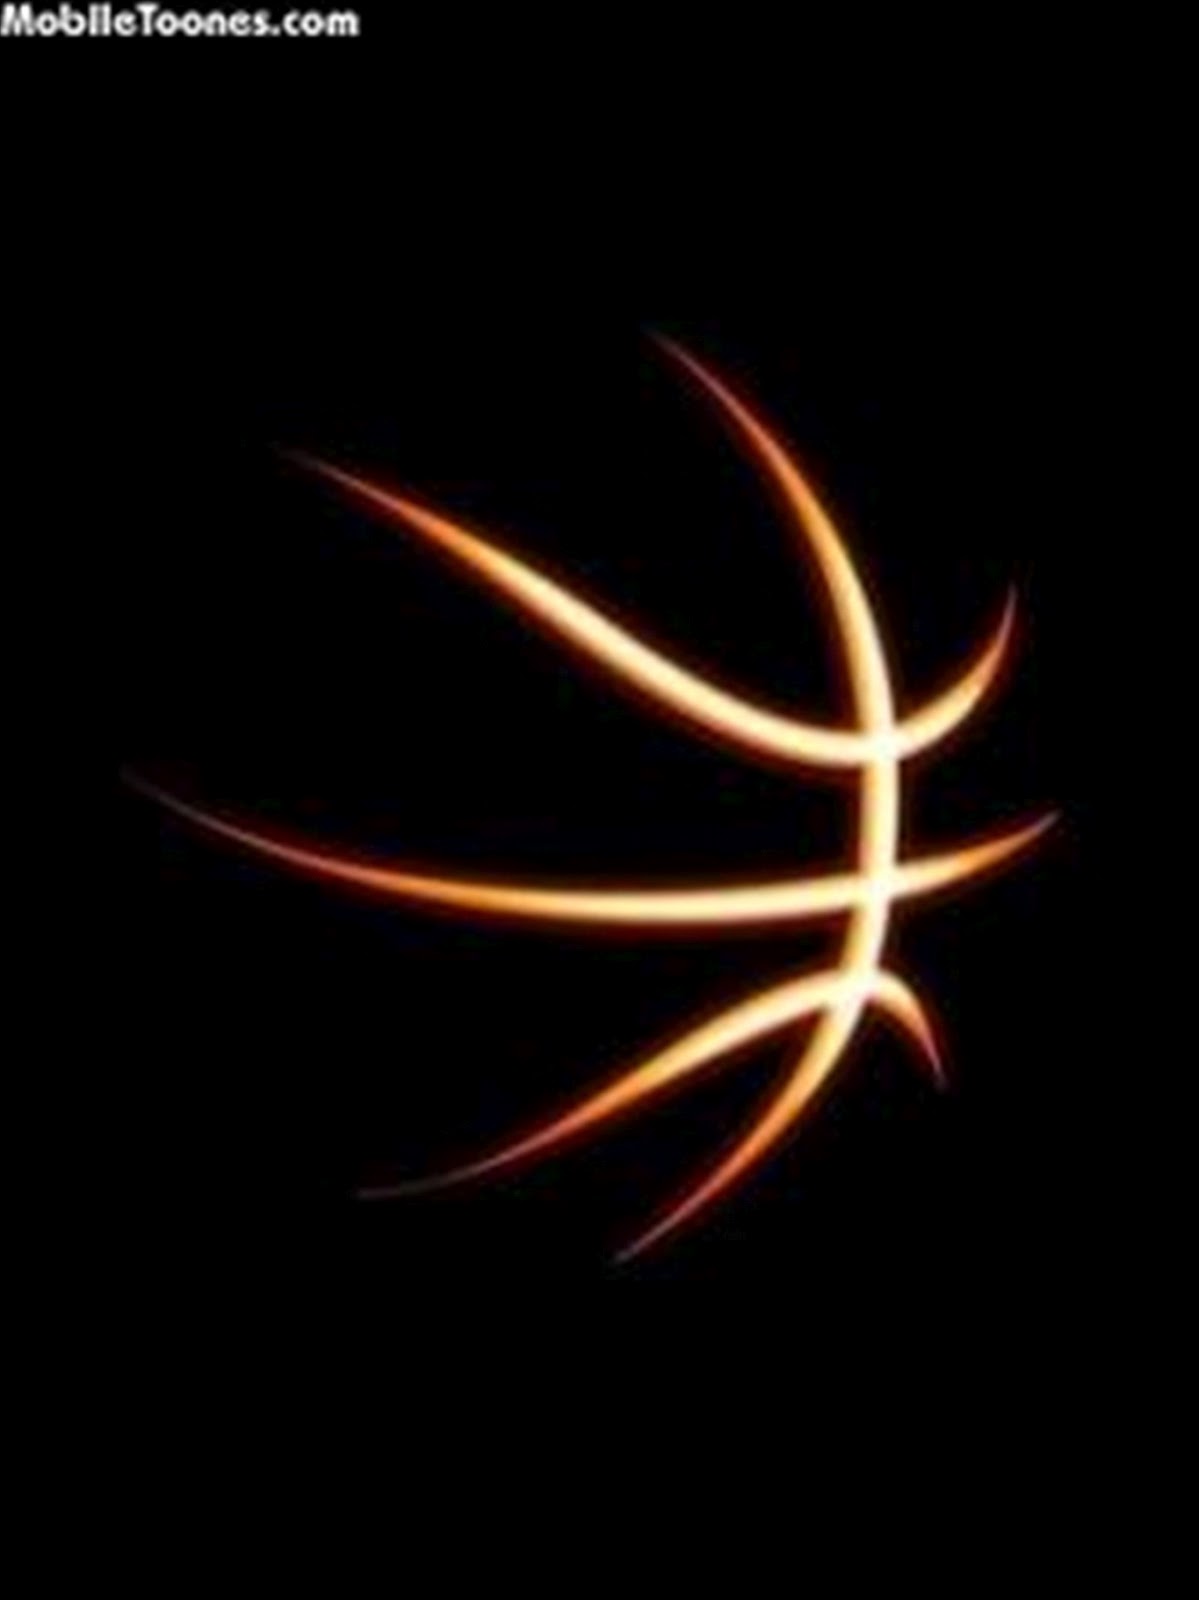 Collection of Basketball Phone Wallpaper on HDWallpapers